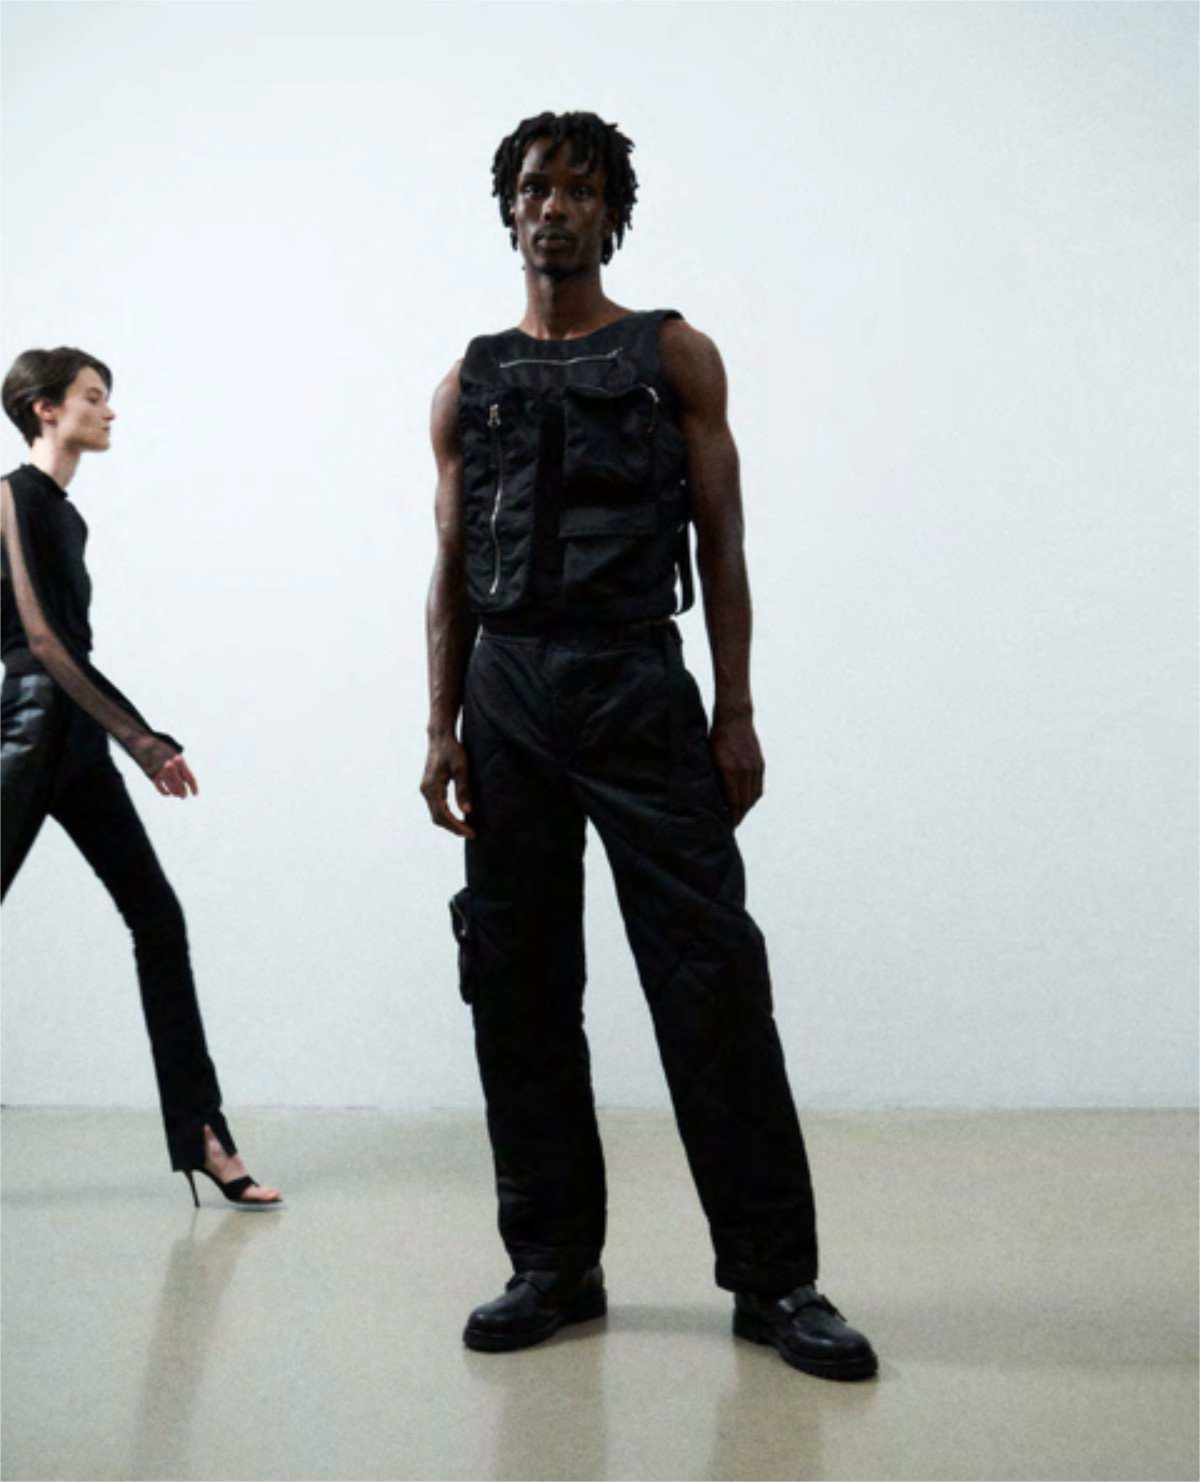 Helmut Lang Presents Its New Resort 2022 Men's Collection